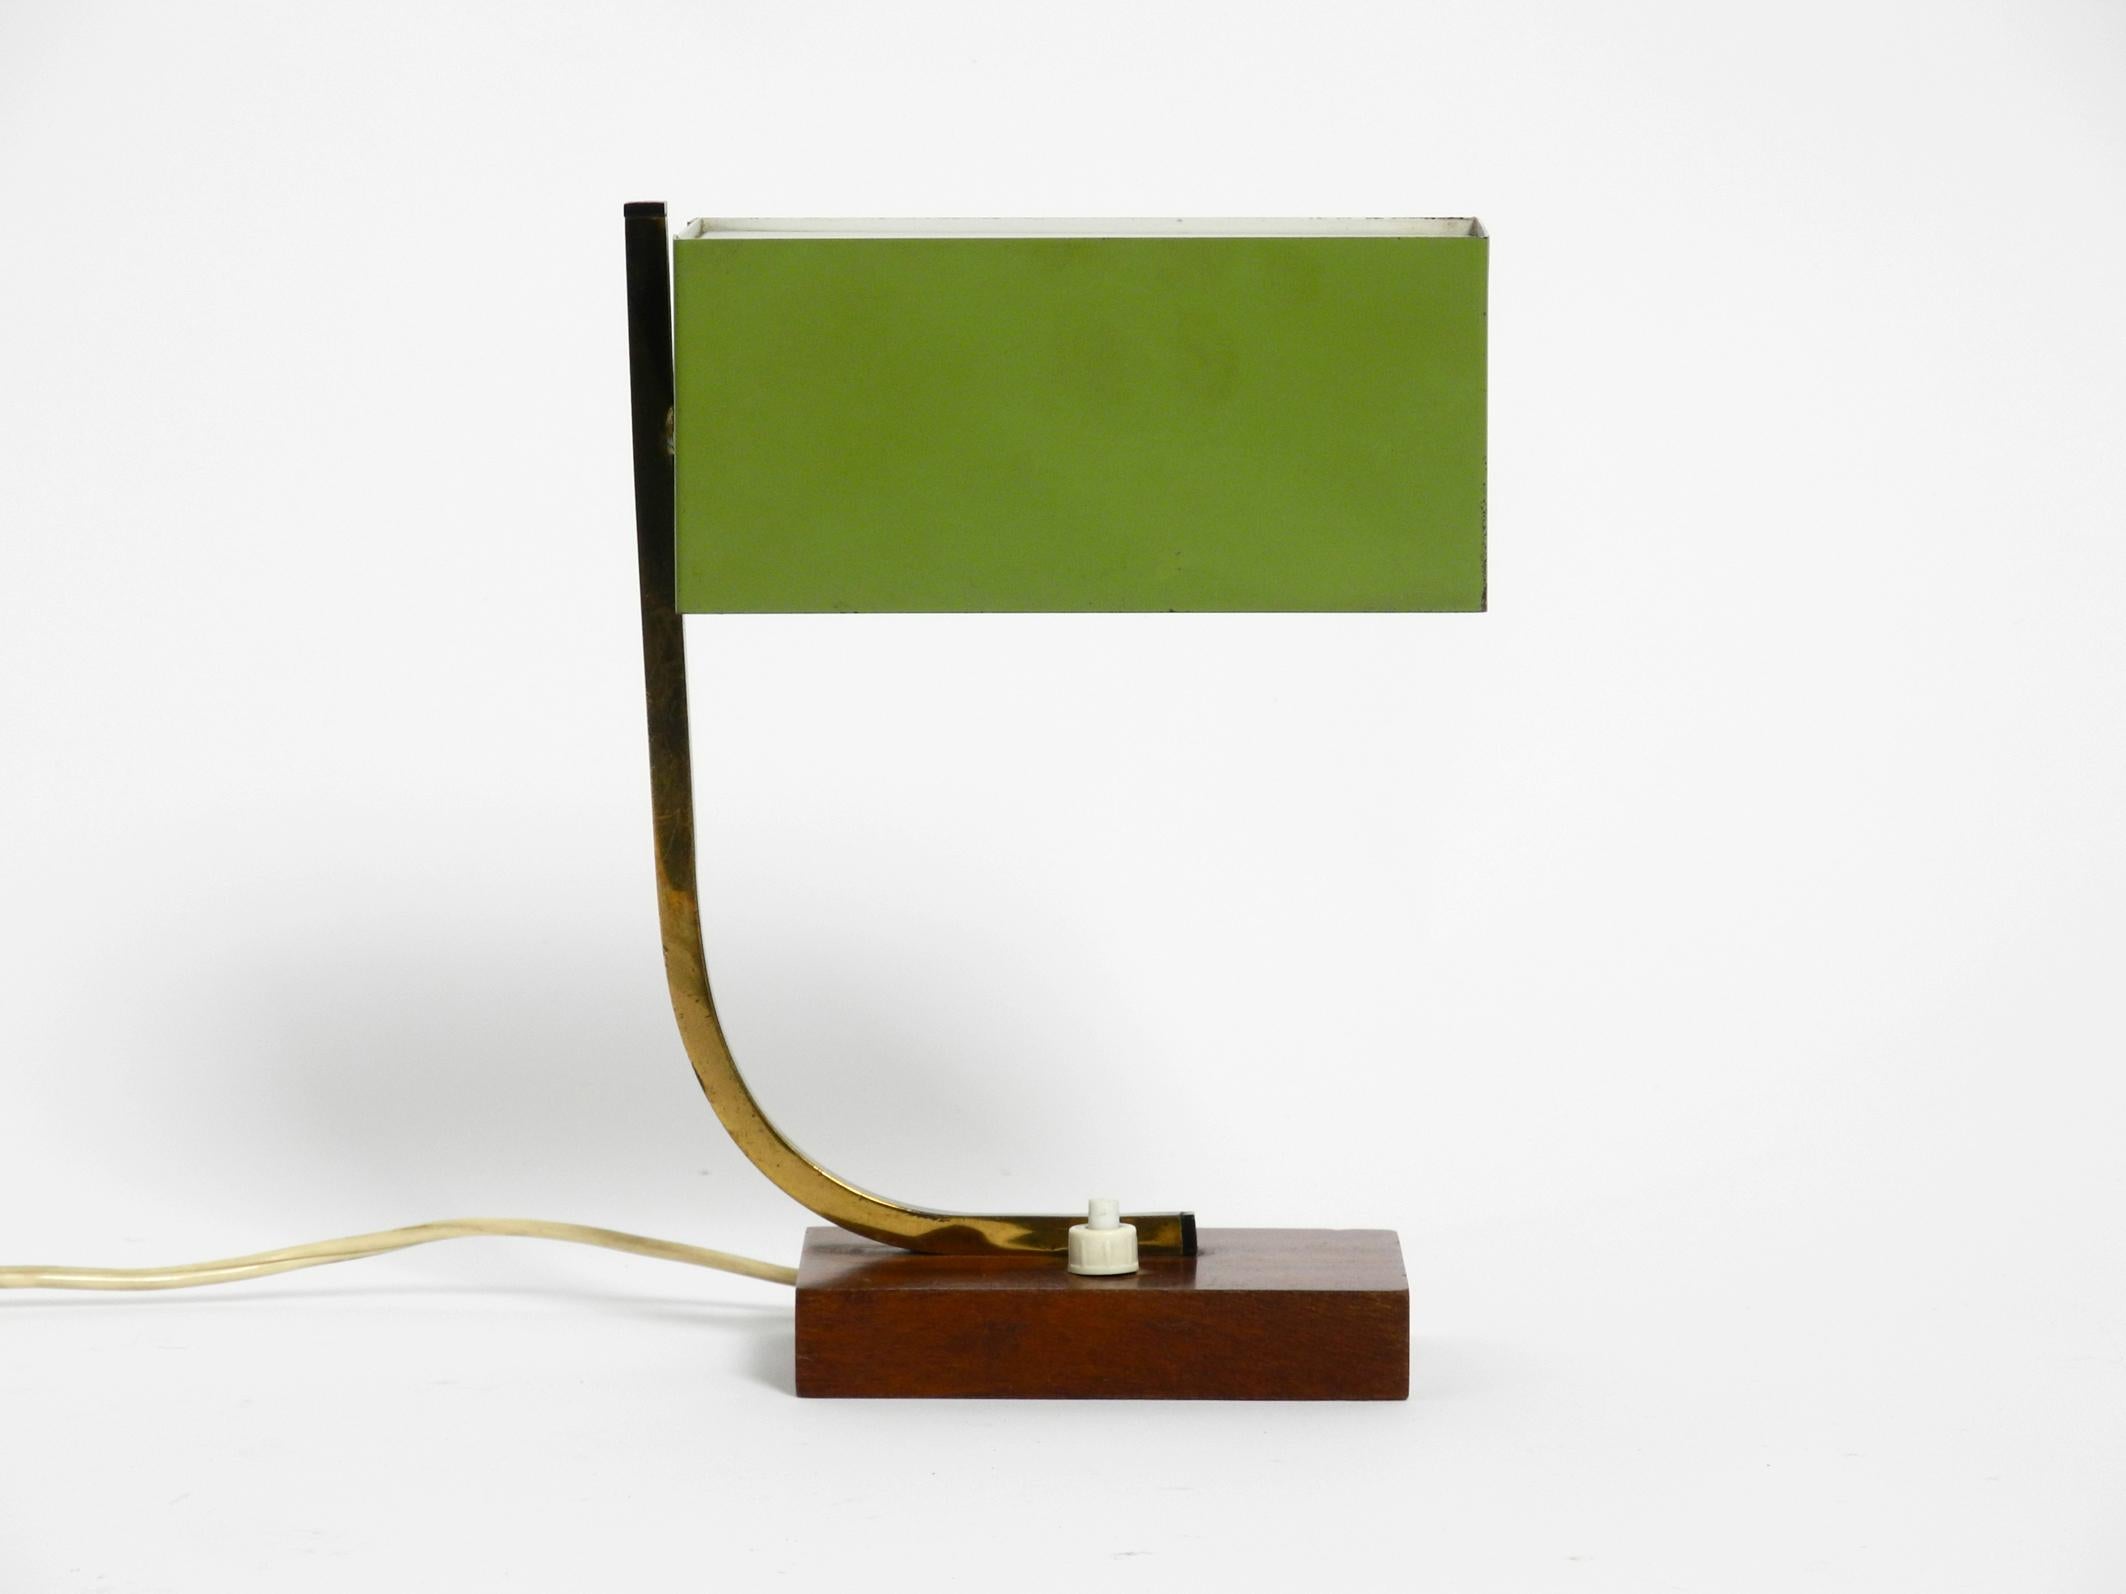 Stunning green Mid-Century Modern metal bedside lamp with wooden base.
Great minimalistic 1950s design. Made in Italy.
Very rare with a rectangular shade.
The shade can be rotated steplessly.
Very high quality made of metal. Brass neck. Walnut